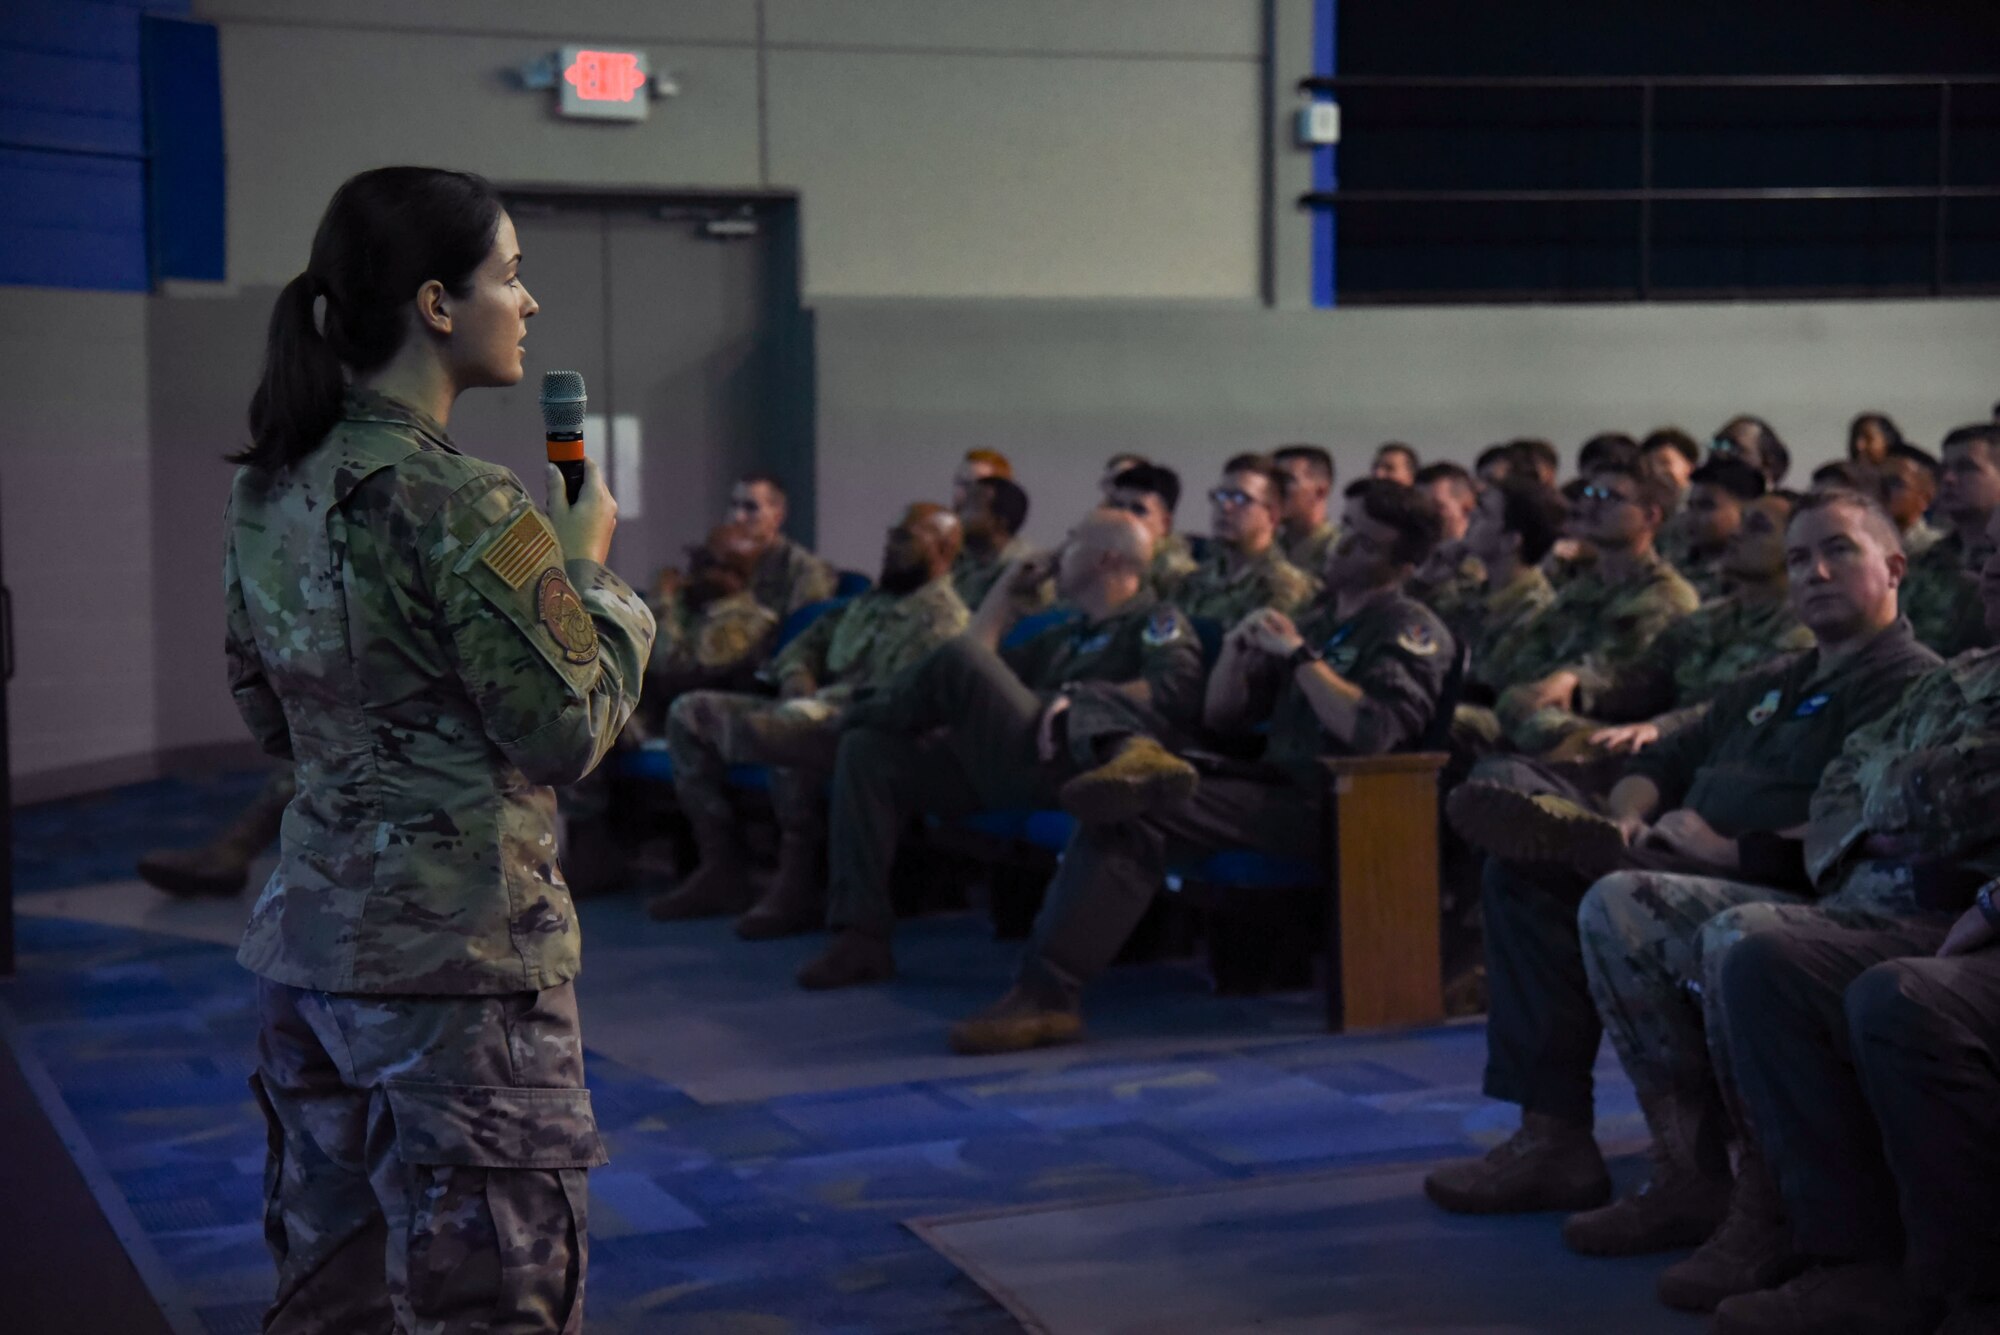 A photo of an Airman speaking.